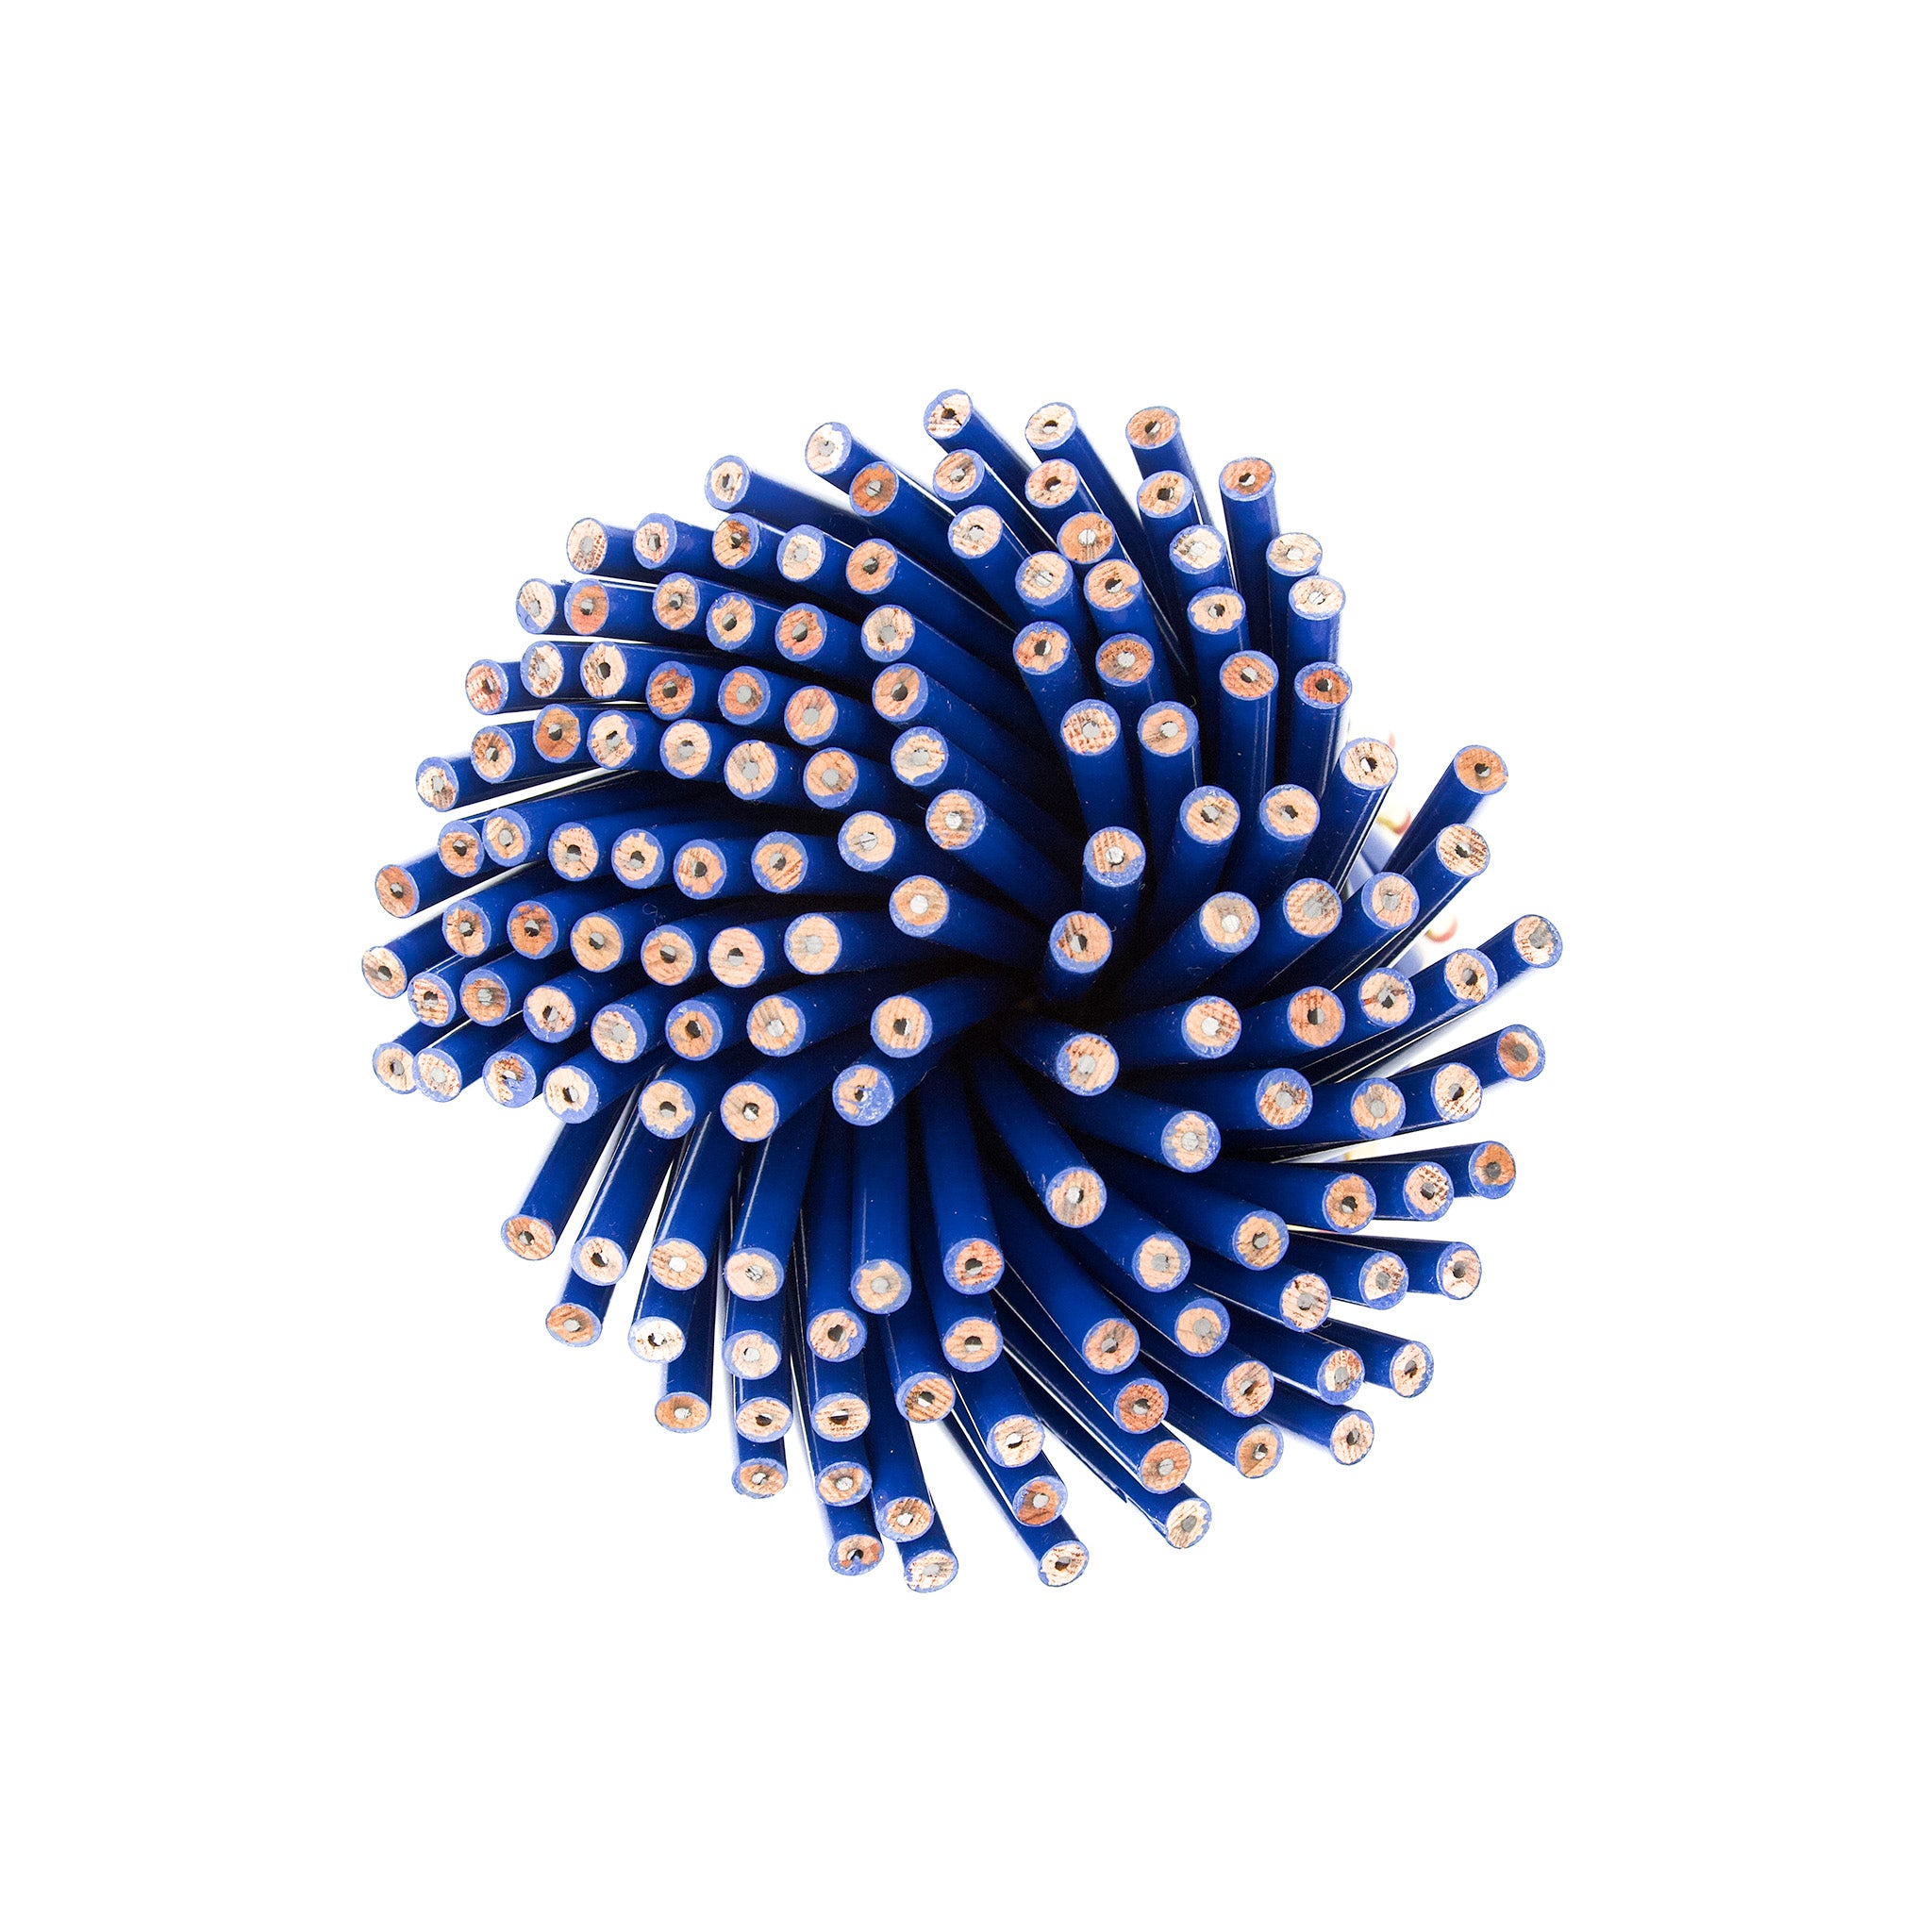 Blank Pencil with Ferrule and Eraser - Round - 144 Pencils